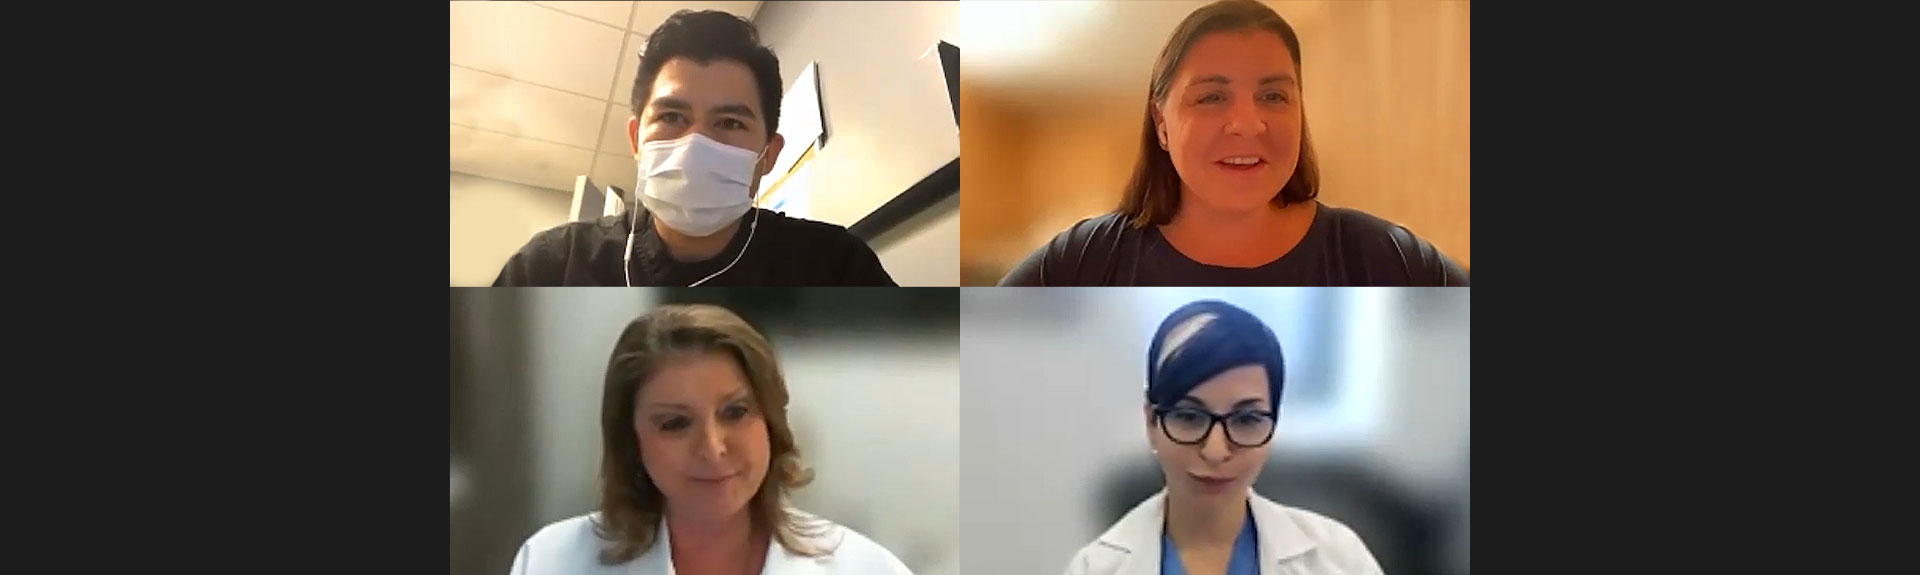 Image of doctors in zoom call